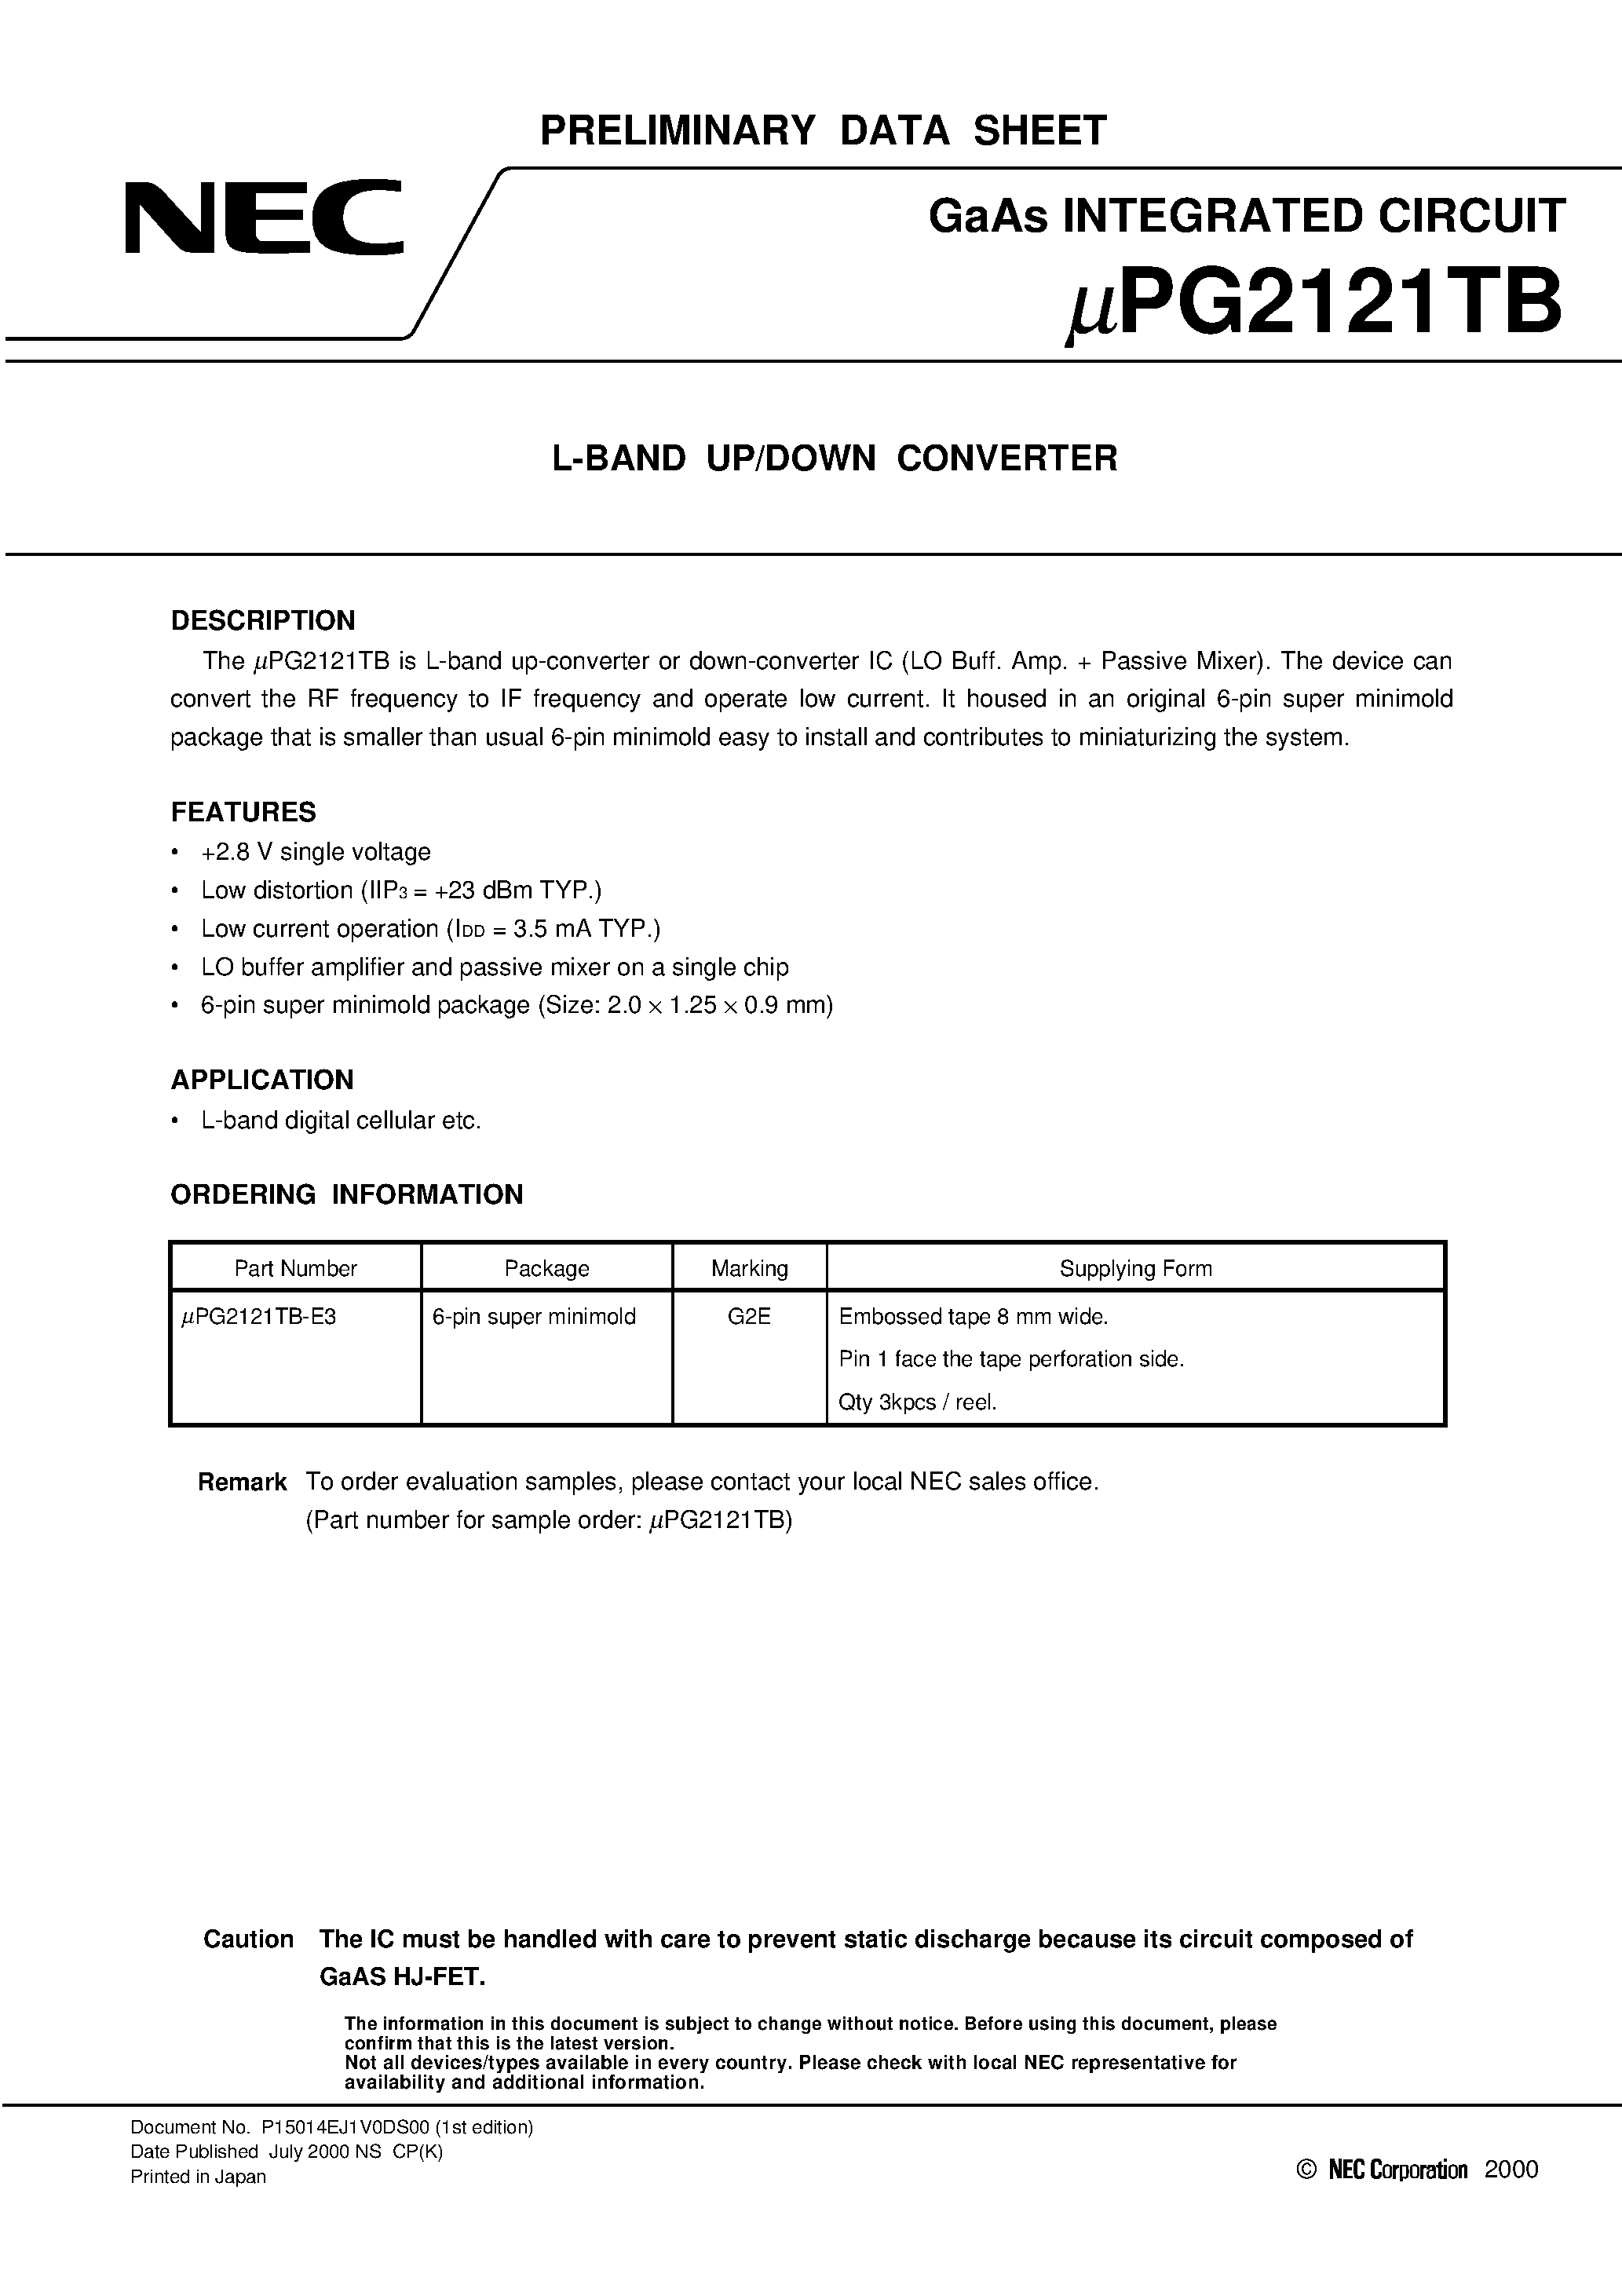 Datasheet UPG2121TB-E3 - L-BAND UP/DOWN CONVERTER page 1